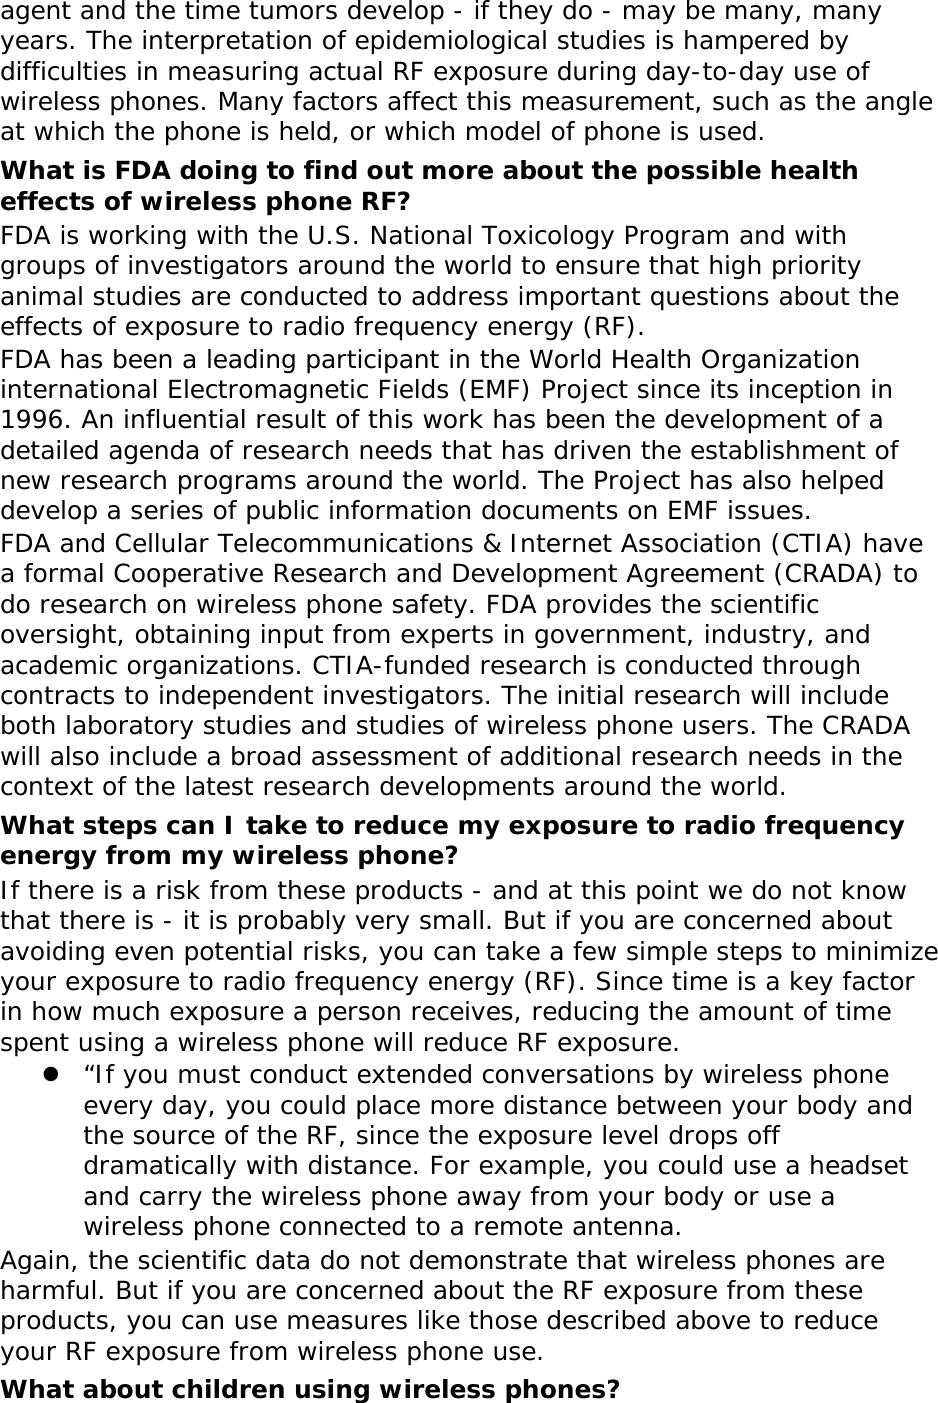  agent and the time tumors develop - if they do - may be many, many years. The interpretation of epidemiological studies is hampered by difficulties in measuring actual RF exposure during day-to-day use of wireless phones. Many factors affect this measurement, such as the angle at which the phone is held, or which model of phone is used. What is FDA doing to find out more about the possible health effects of wireless phone RF? FDA is working with the U.S. National Toxicology Program and with groups of investigators around the world to ensure that high priority animal studies are conducted to address important questions about the effects of exposure to radio frequency energy (RF). FDA has been a leading participant in the World Health Organization international Electromagnetic Fields (EMF) Project since its inception in 1996. An influential result of this work has been the development of a detailed agenda of research needs that has driven the establishment of new research programs around the world. The Project has also helped develop a series of public information documents on EMF issues. FDA and Cellular Telecommunications &amp; Internet Association (CTIA) have a formal Cooperative Research and Development Agreement (CRADA) to do research on wireless phone safety. FDA provides the scientific oversight, obtaining input from experts in government, industry, and academic organizations. CTIA-funded research is conducted through contracts to independent investigators. The initial research will include both laboratory studies and studies of wireless phone users. The CRADA will also include a broad assessment of additional research needs in the context of the latest research developments around the world. What steps can I take to reduce my exposure to radio frequency energy from my wireless phone? If there is a risk from these products - and at this point we do not know that there is - it is probably very small. But if you are concerned about avoiding even potential risks, you can take a few simple steps to minimize your exposure to radio frequency energy (RF). Since time is a key factor in how much exposure a person receives, reducing the amount of time spent using a wireless phone will reduce RF exposure. z “If you must conduct extended conversations by wireless phone every day, you could place more distance between your body and the source of the RF, since the exposure level drops off dramatically with distance. For example, you could use a headset and carry the wireless phone away from your body or use a wireless phone connected to a remote antenna. Again, the scientific data do not demonstrate that wireless phones are harmful. But if you are concerned about the RF exposure from these products, you can use measures like those described above to reduce your RF exposure from wireless phone use. What about children using wireless phones?  